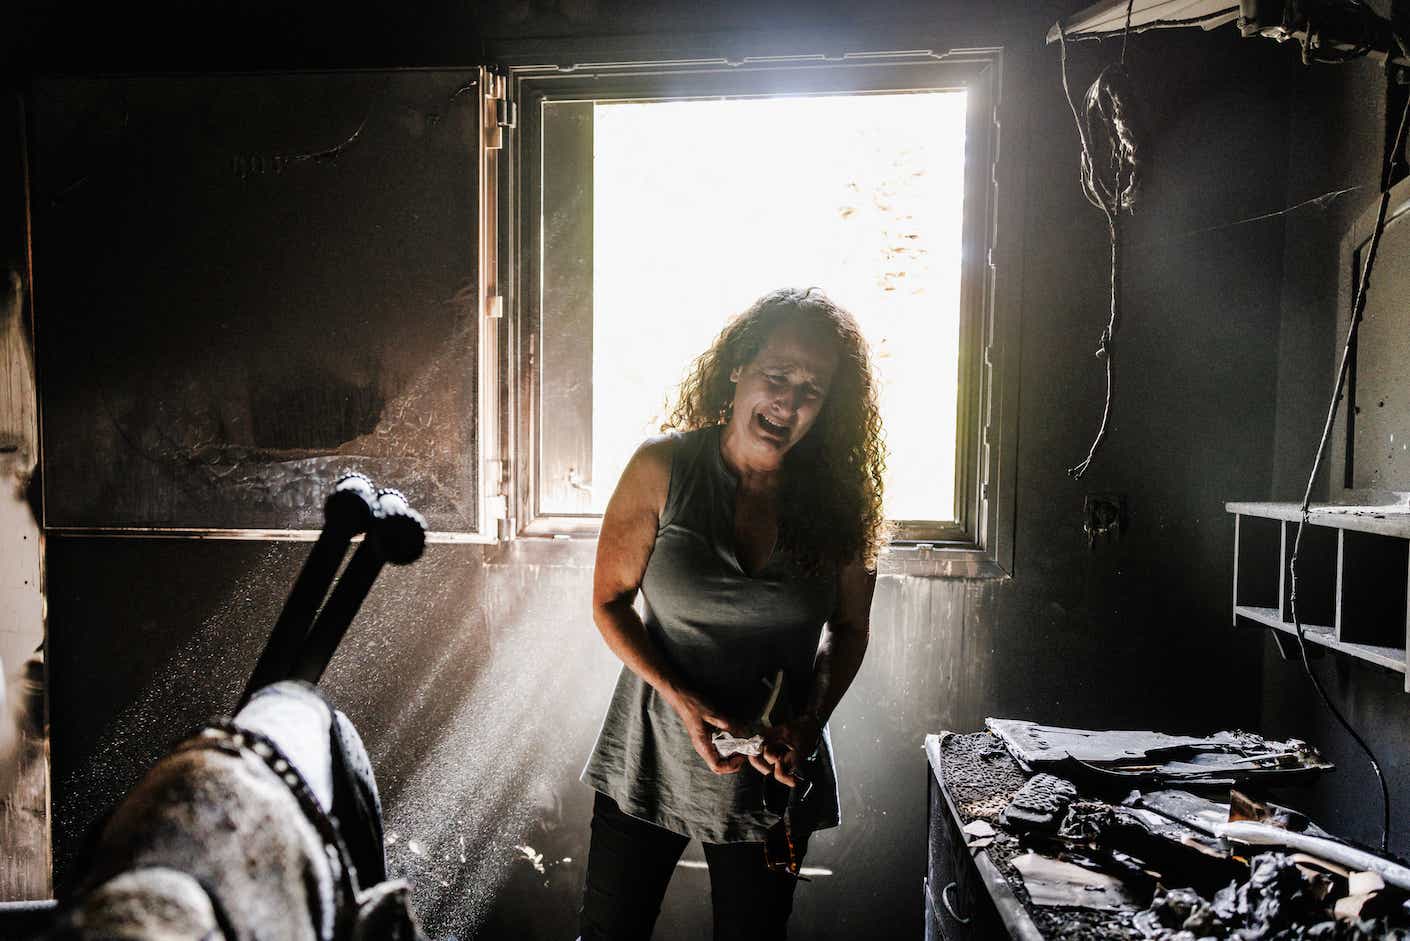 Hadas Kalderon, whose two children Erez and Sahar, and their father, Ofir have been kidnapped, and her mother and niece killed, breaks down in tears while looking through the burnt out home of her late mother Rina Sutzkever on October 30, 2023 in Kibbutz Nir Oz, Israel. More than three weeks since Hamas's Oct 7 attacks in Israel, which killed 1,400 according to Israeli authorities, just over half have now been laid to rest, and over four-fifths have been identified. Volunteers continue to identify victims at the country's Shura military facility. (Photo by Dan Kitwood/Getty Images)